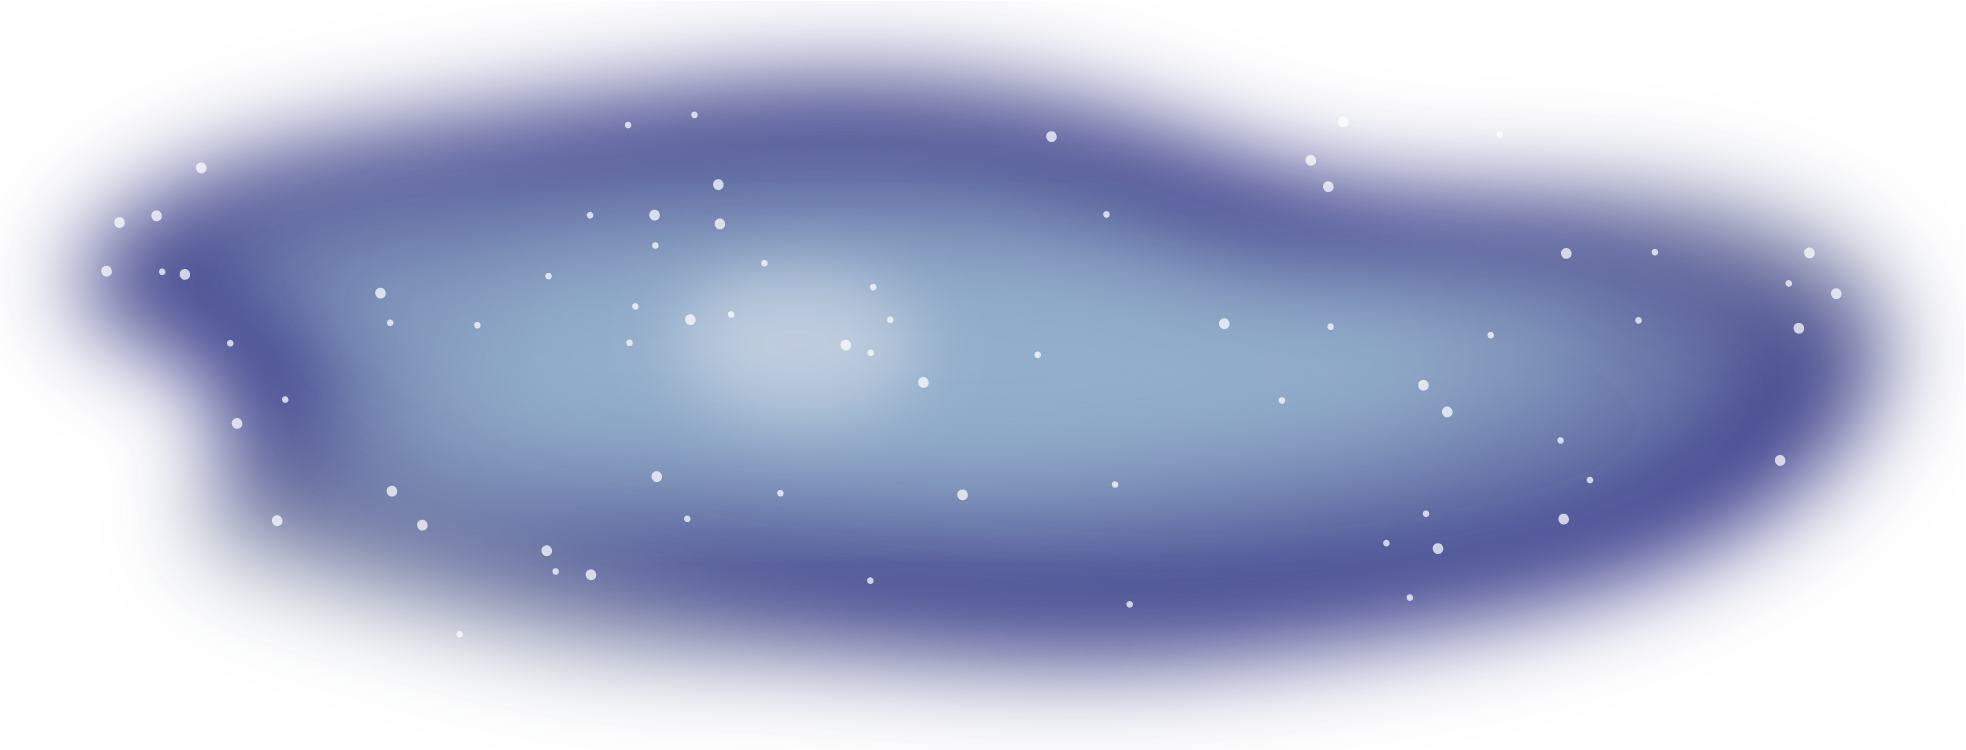 A very long, diffuse, vaguely oval-shaped blob has a hazy dark purple color around its edge and it gets progressively lighter moving inward toward a cloudy white center. White dots representing stars speckle the image.